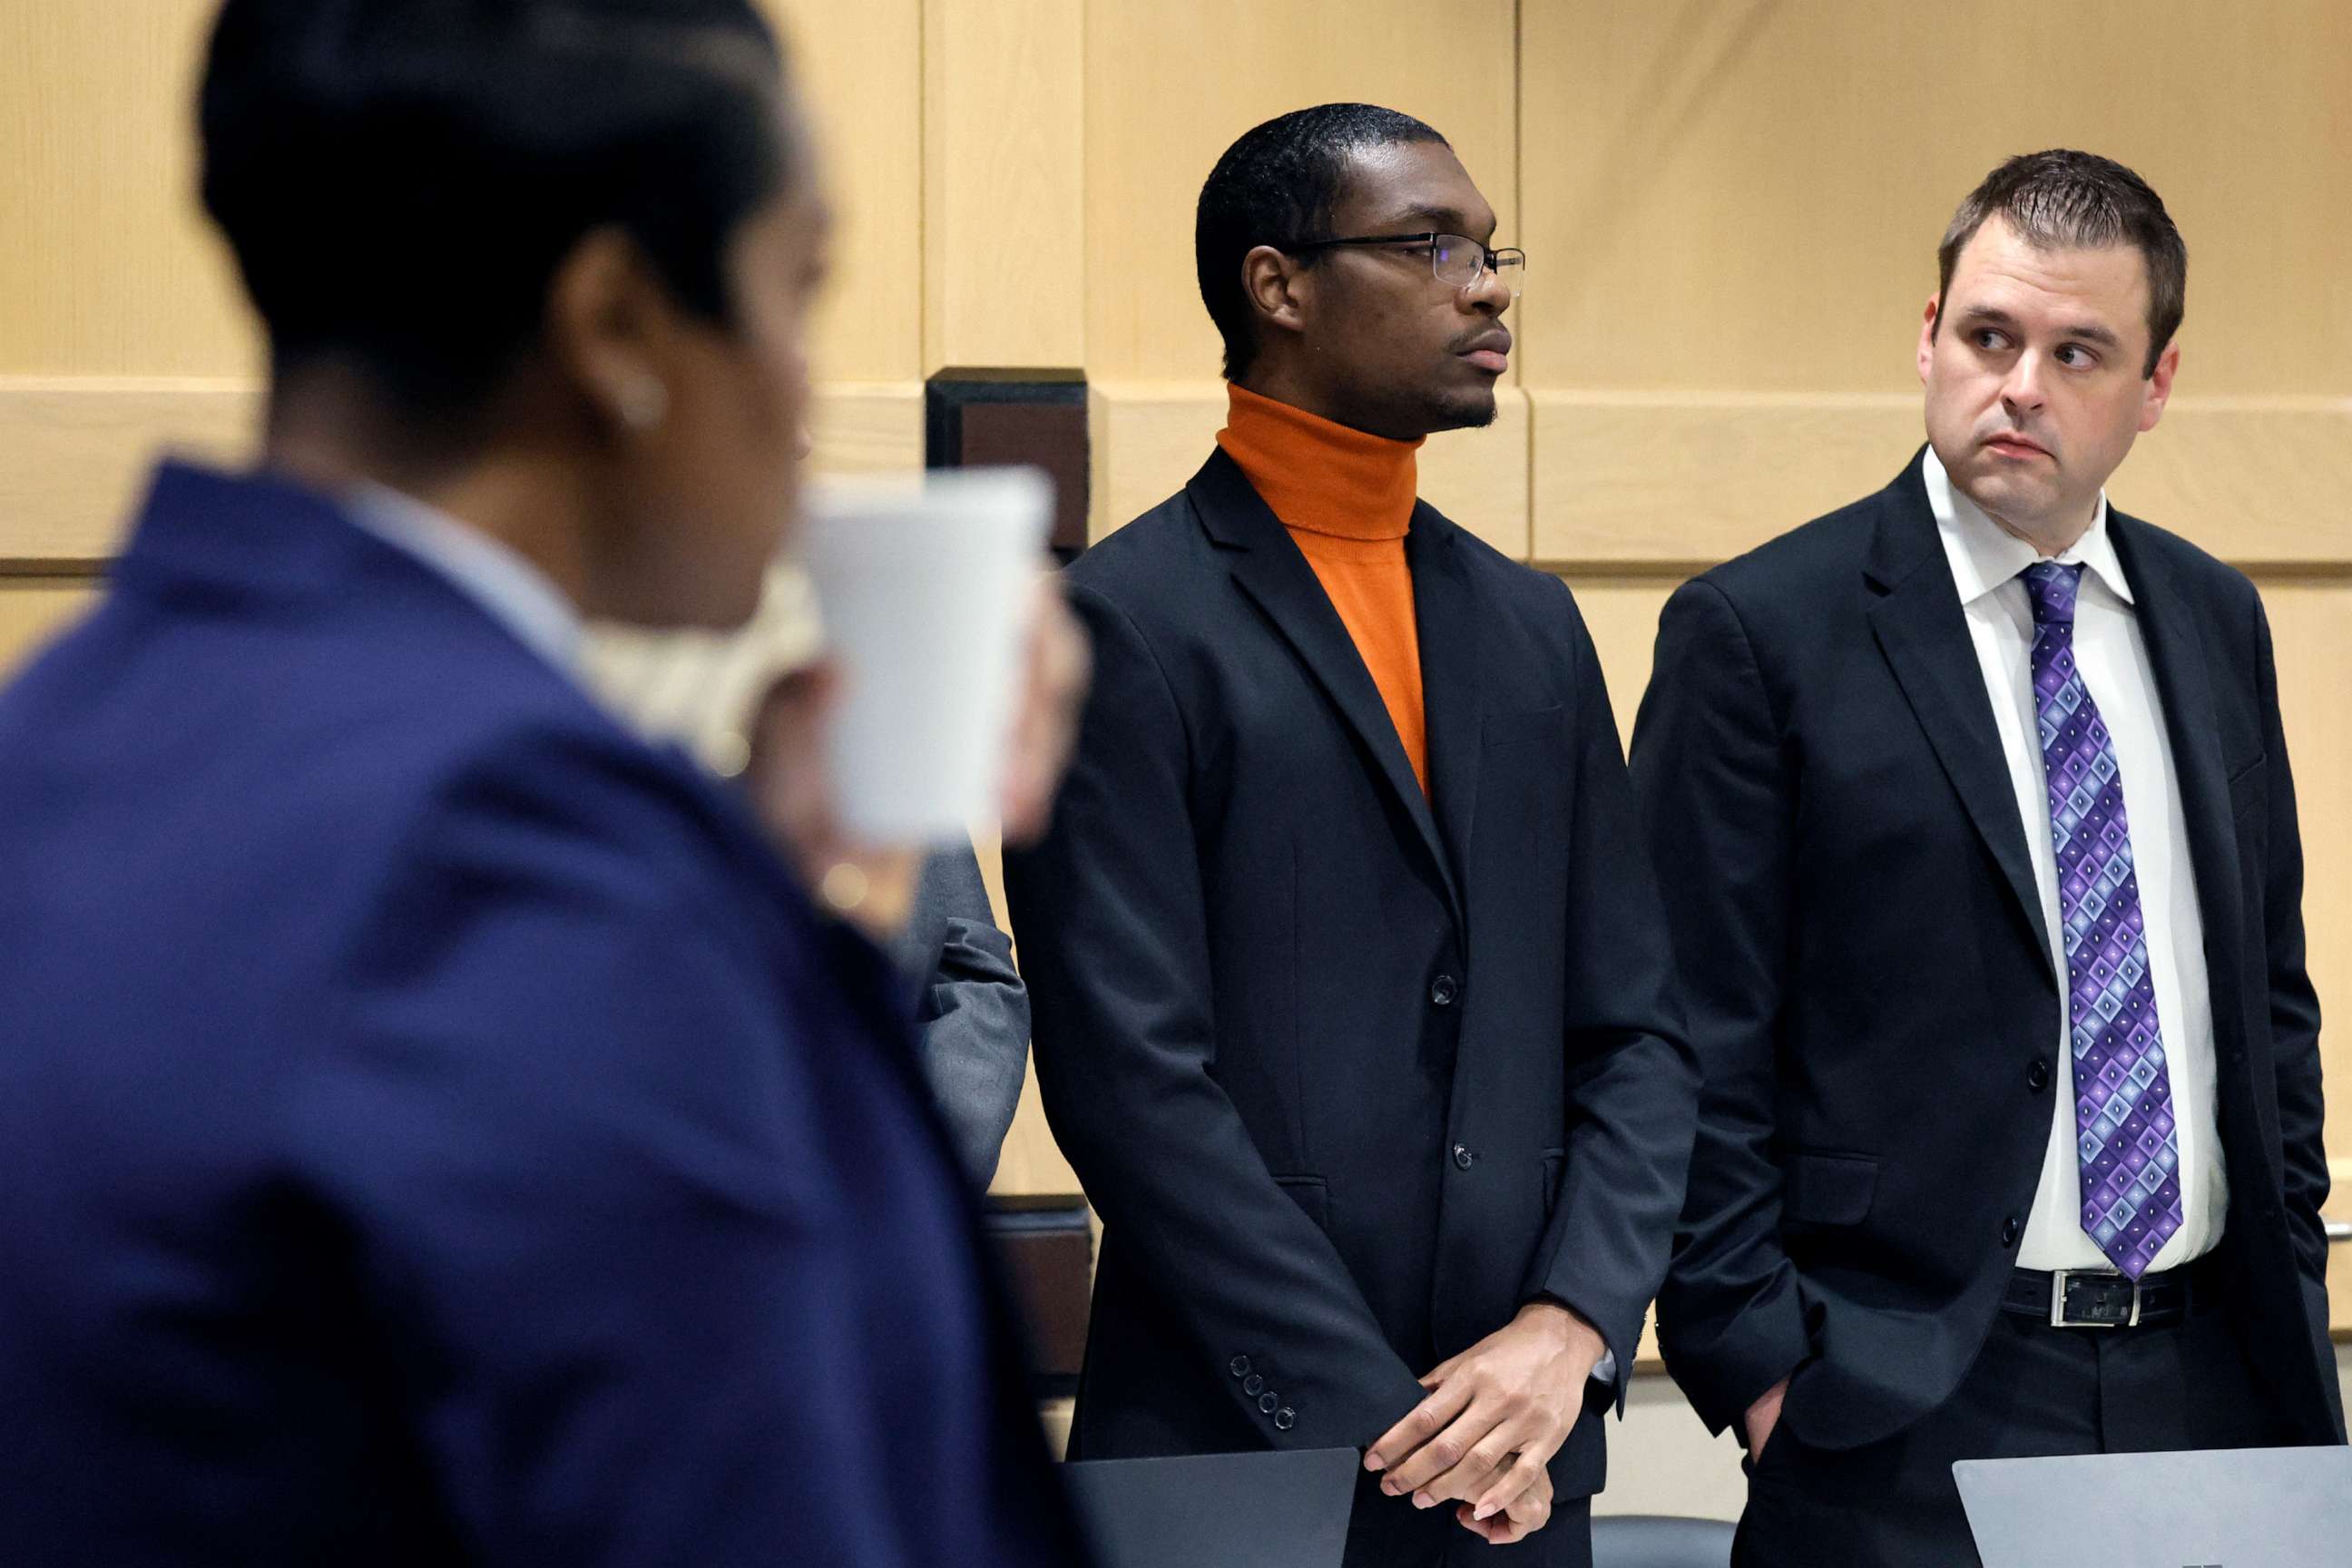 PHOTO: Shooting suspect Michael Boatwright, center, stands for the jury to enter the courtroom for closing arguments in the XXXTentacion murder trial at the Broward County Courthouse in Fort Lauderdale, Fla., March 7, 2023.